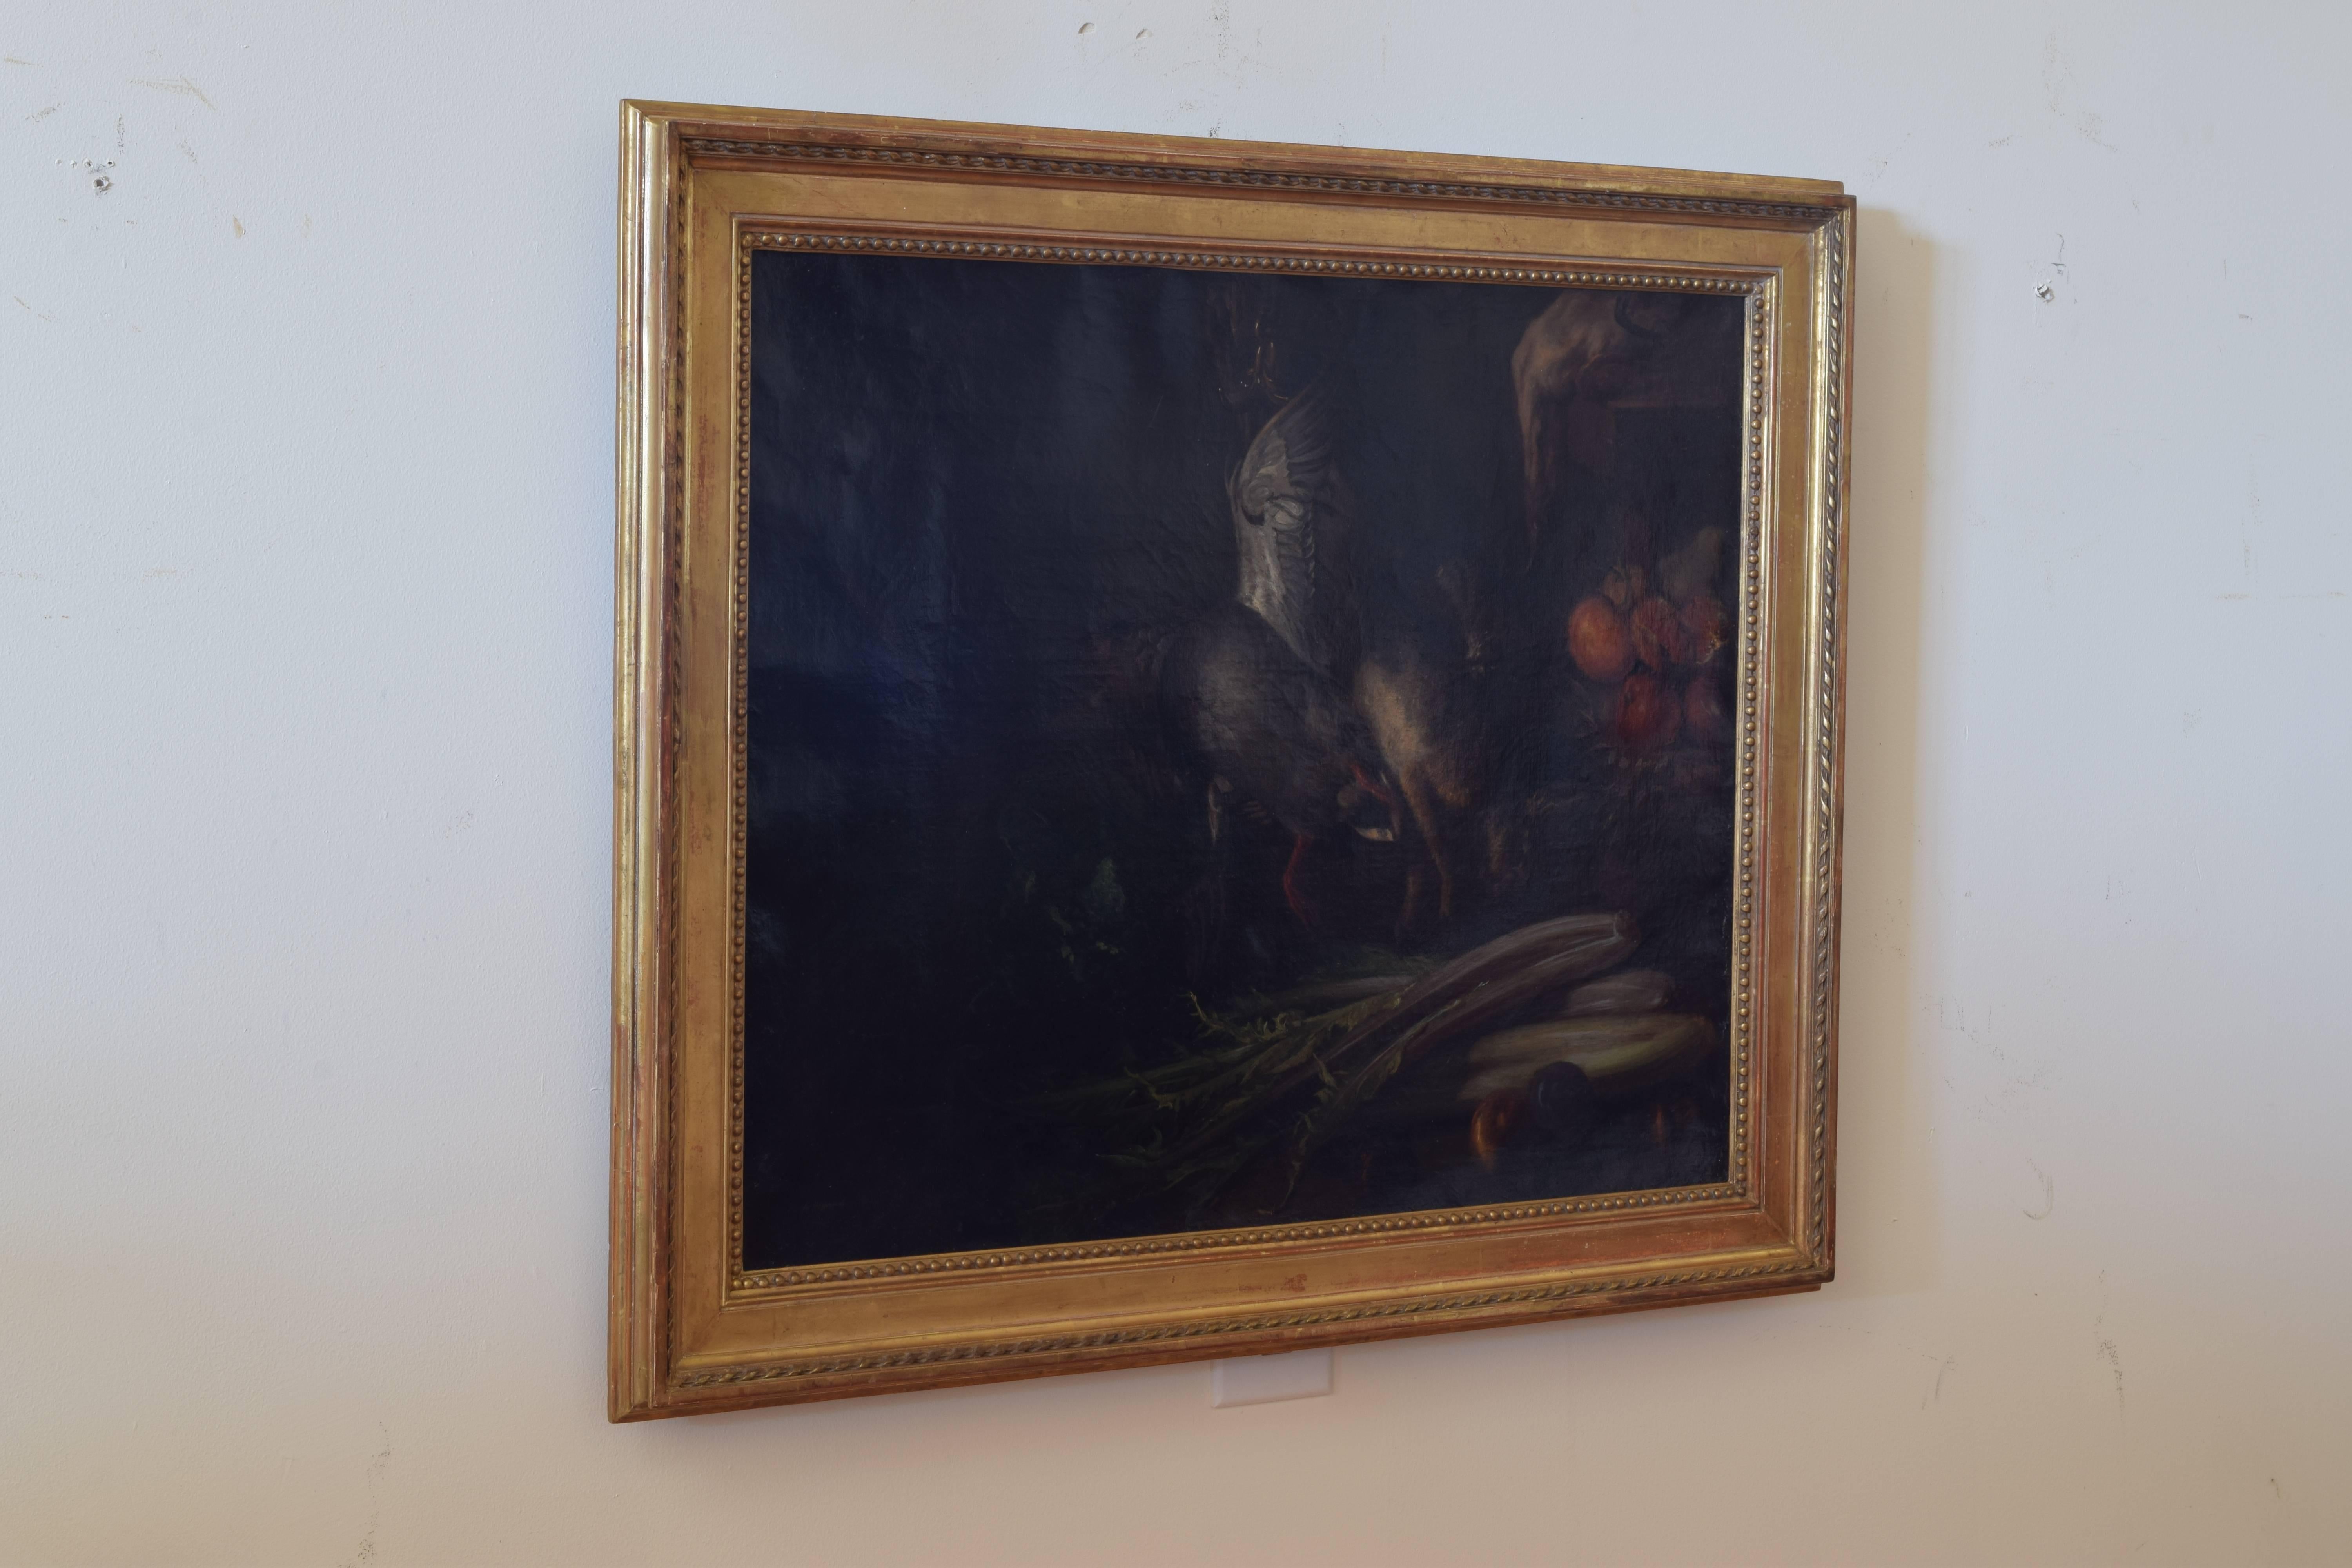 The painting depicting a still life with a hare, fowl, fruits, and leeks, set in a period giltwood frame from the second quarter of the 19th century, initials AP on back of canvas.